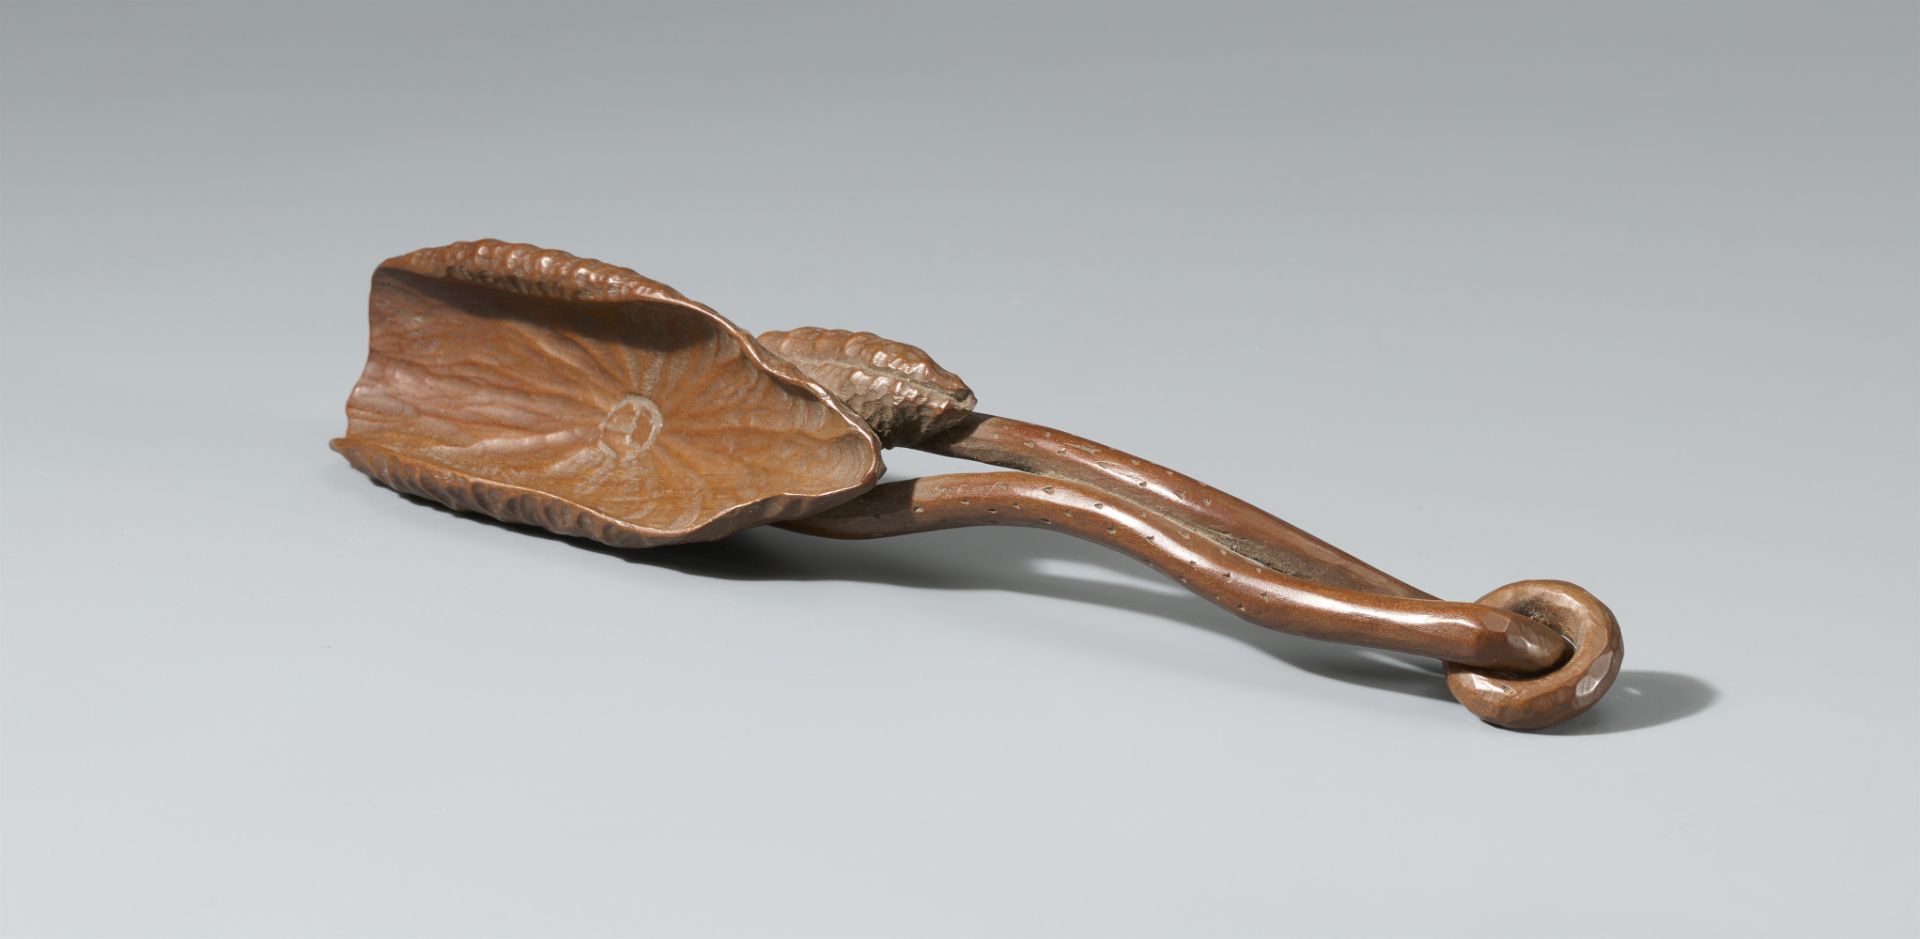 A wooden scoop for tea leaves (chagô). 20th century - Image 4 of 4